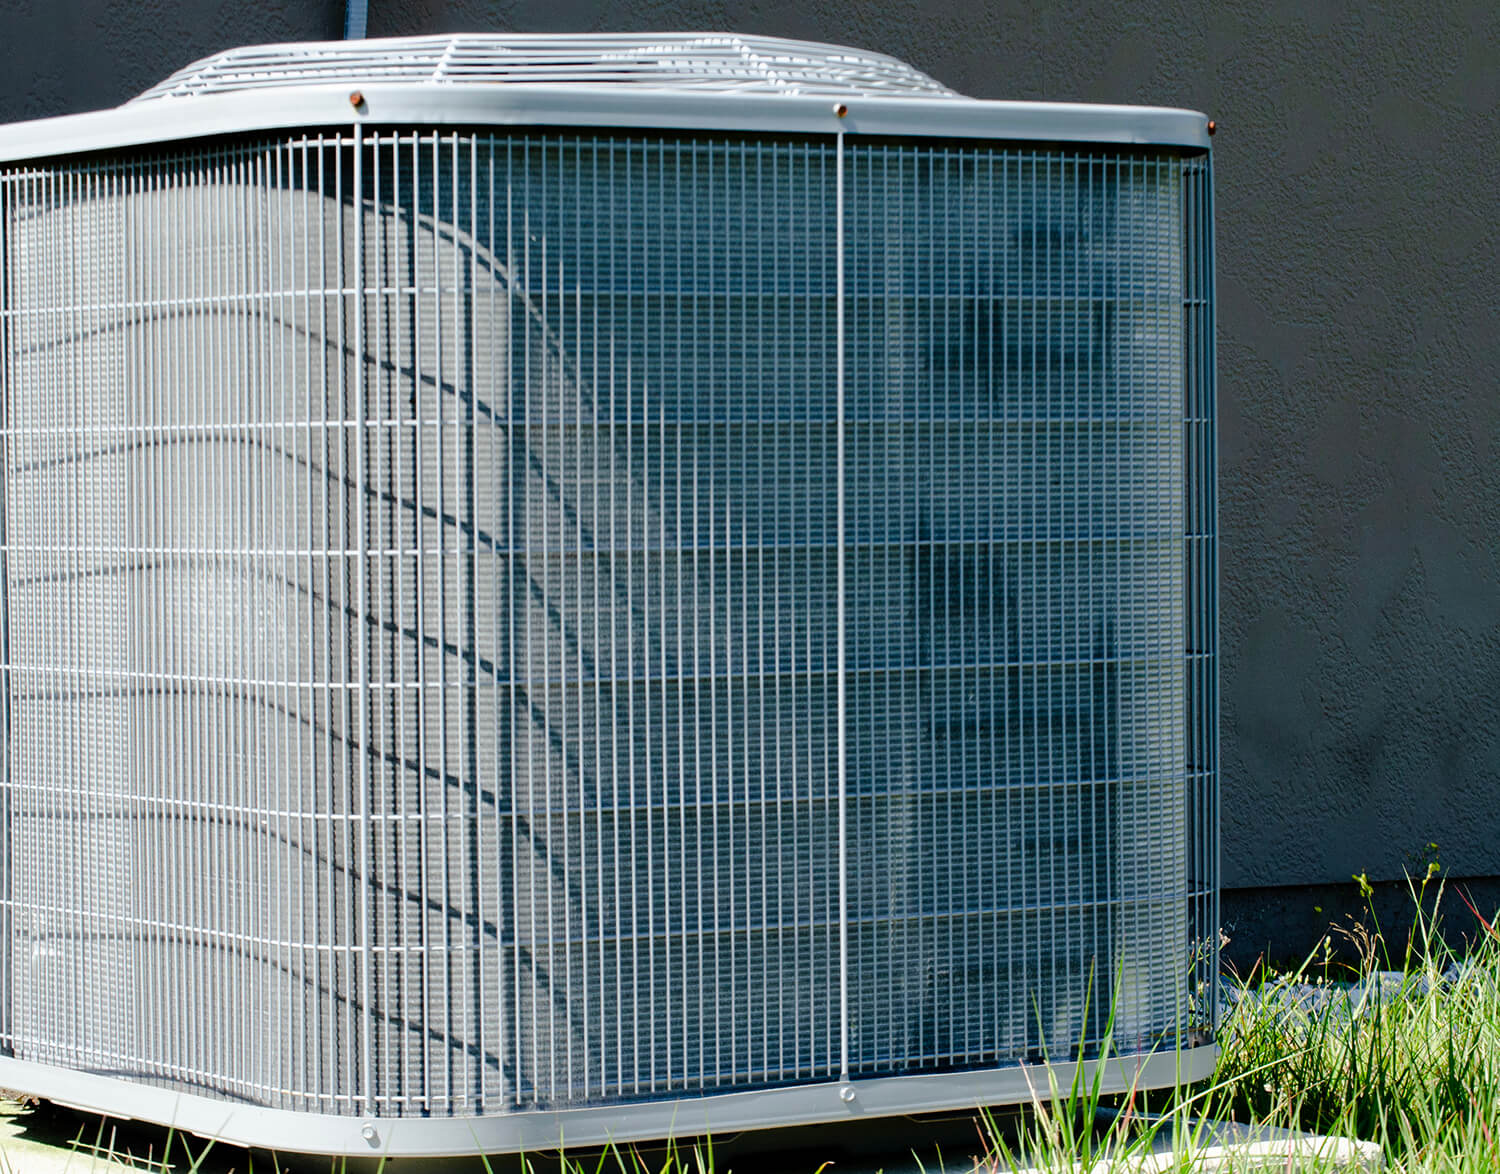 A Homeowner Won’t Stop Calling Me About Heating, Ventilation and A/C Issues